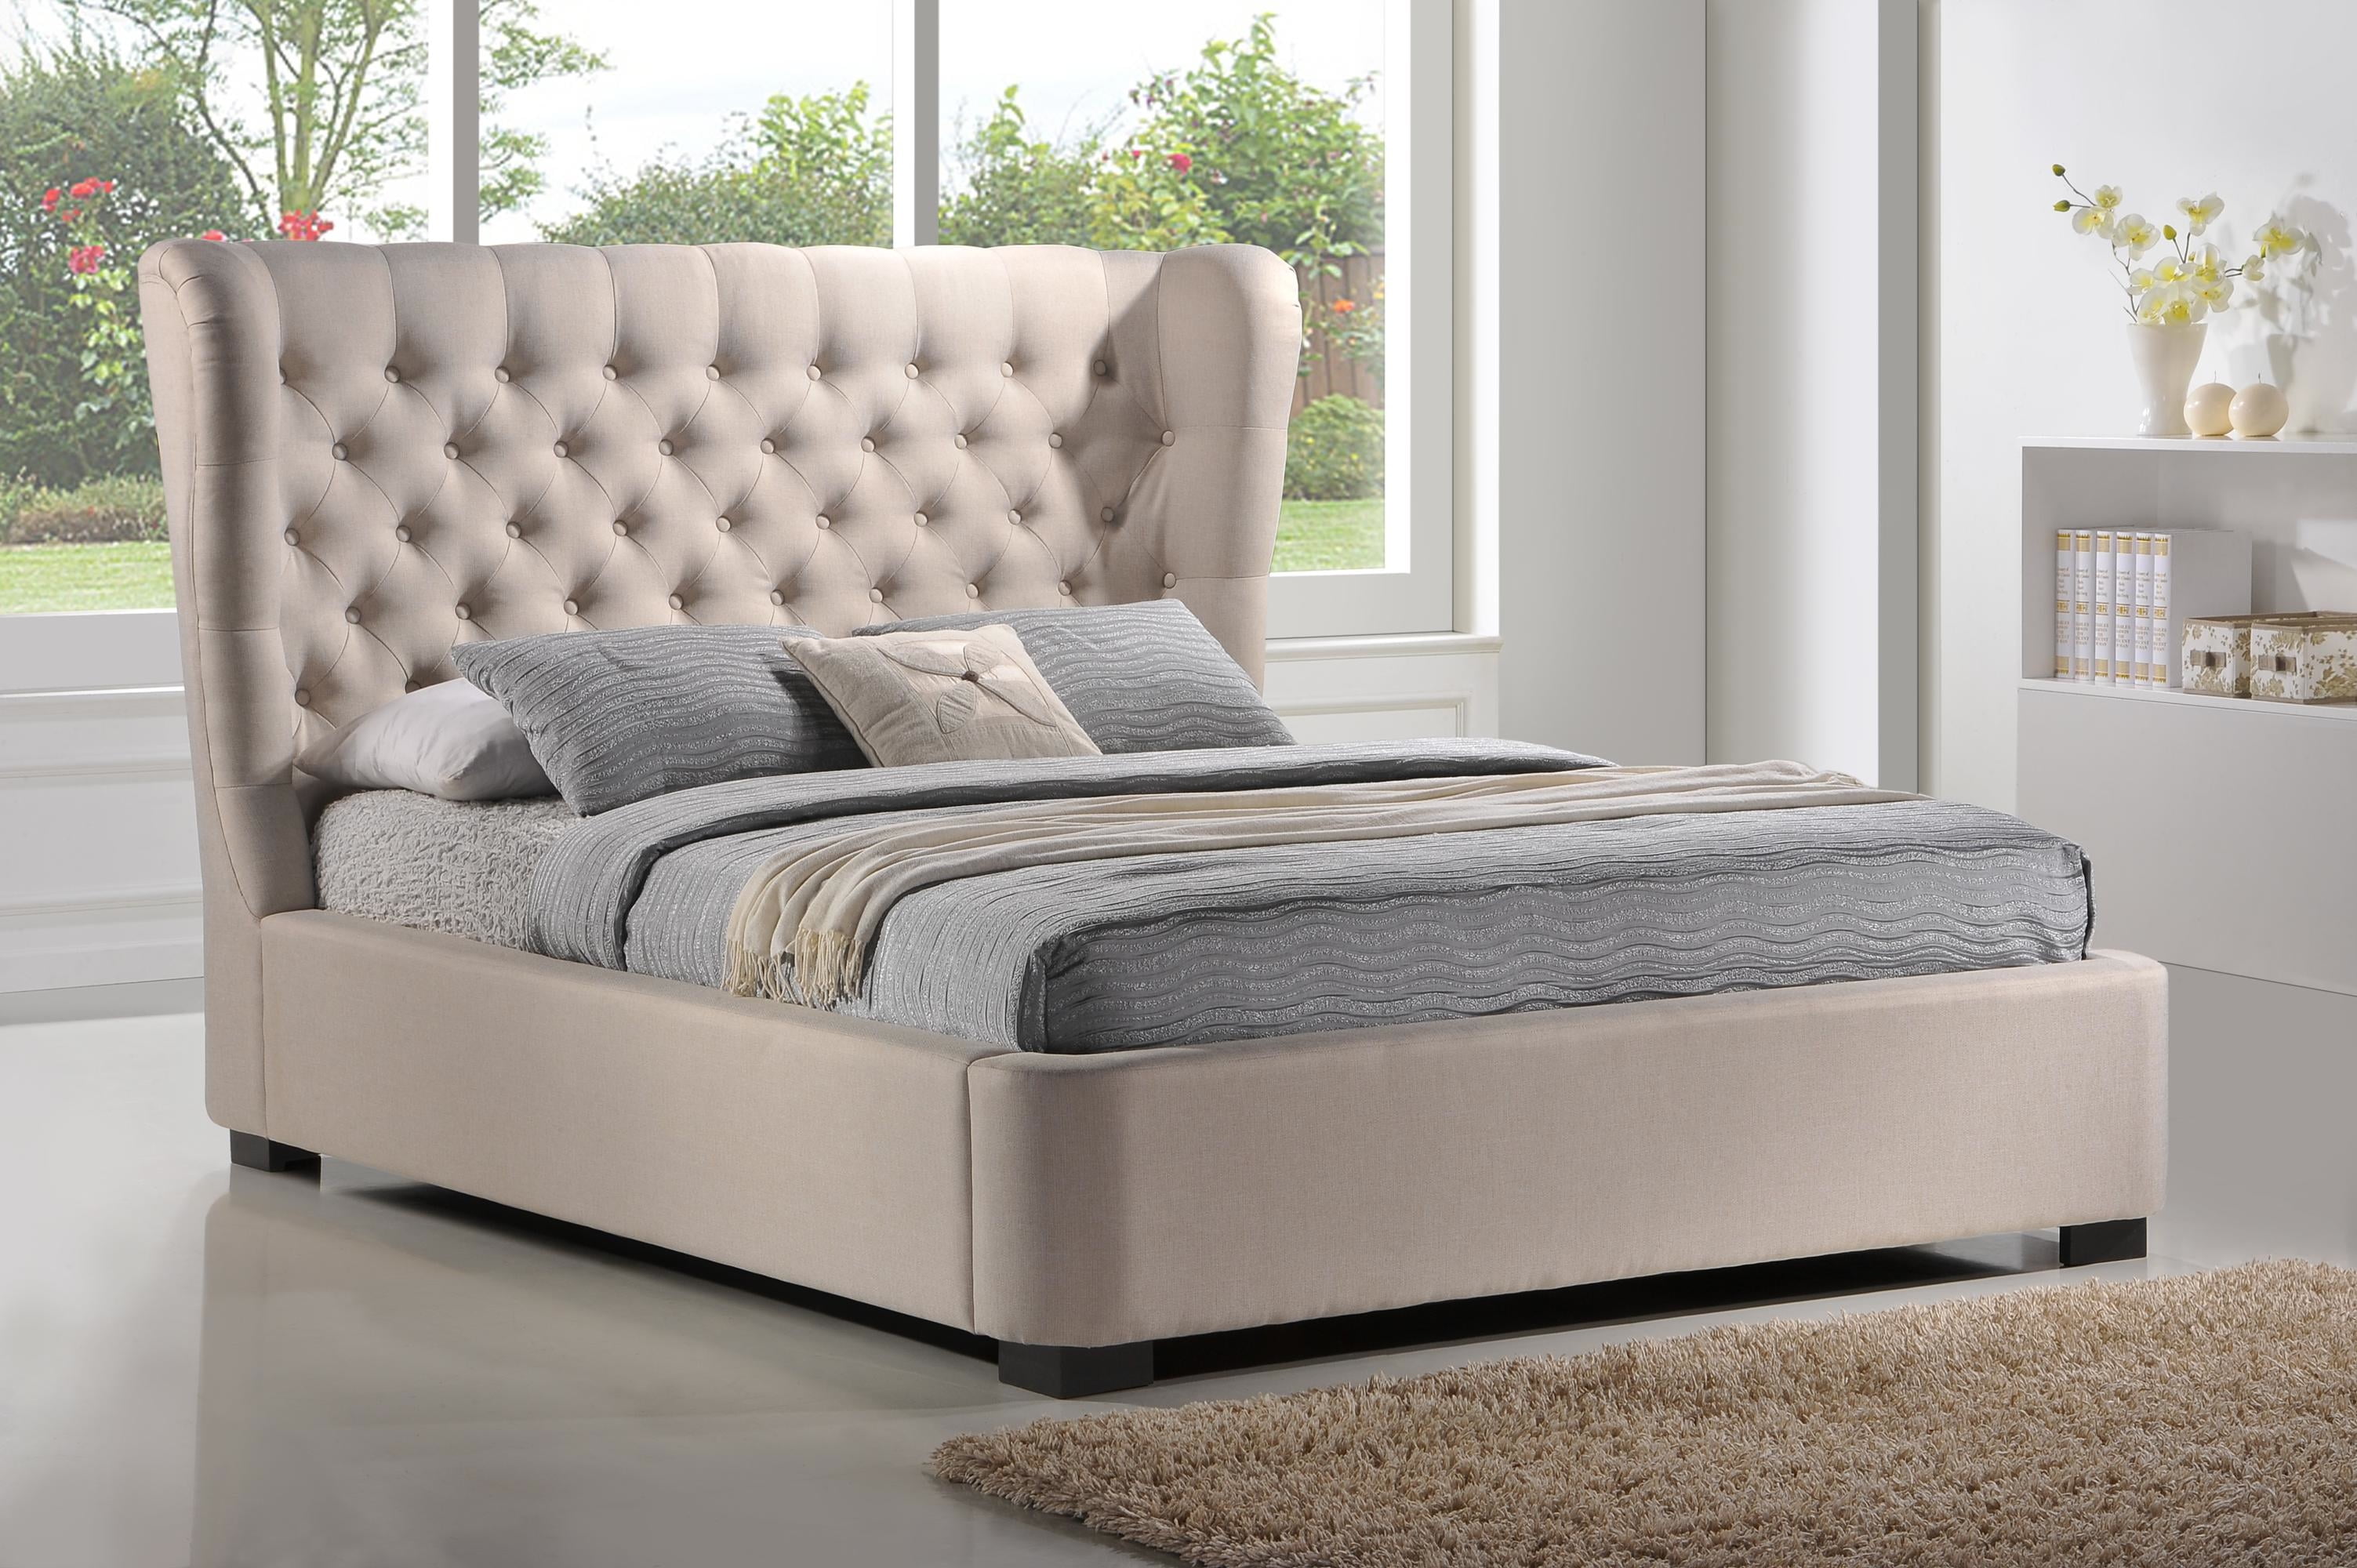 Queen Platform Bed Frame With Upholstered Headboard ~ Amolife Queen ...